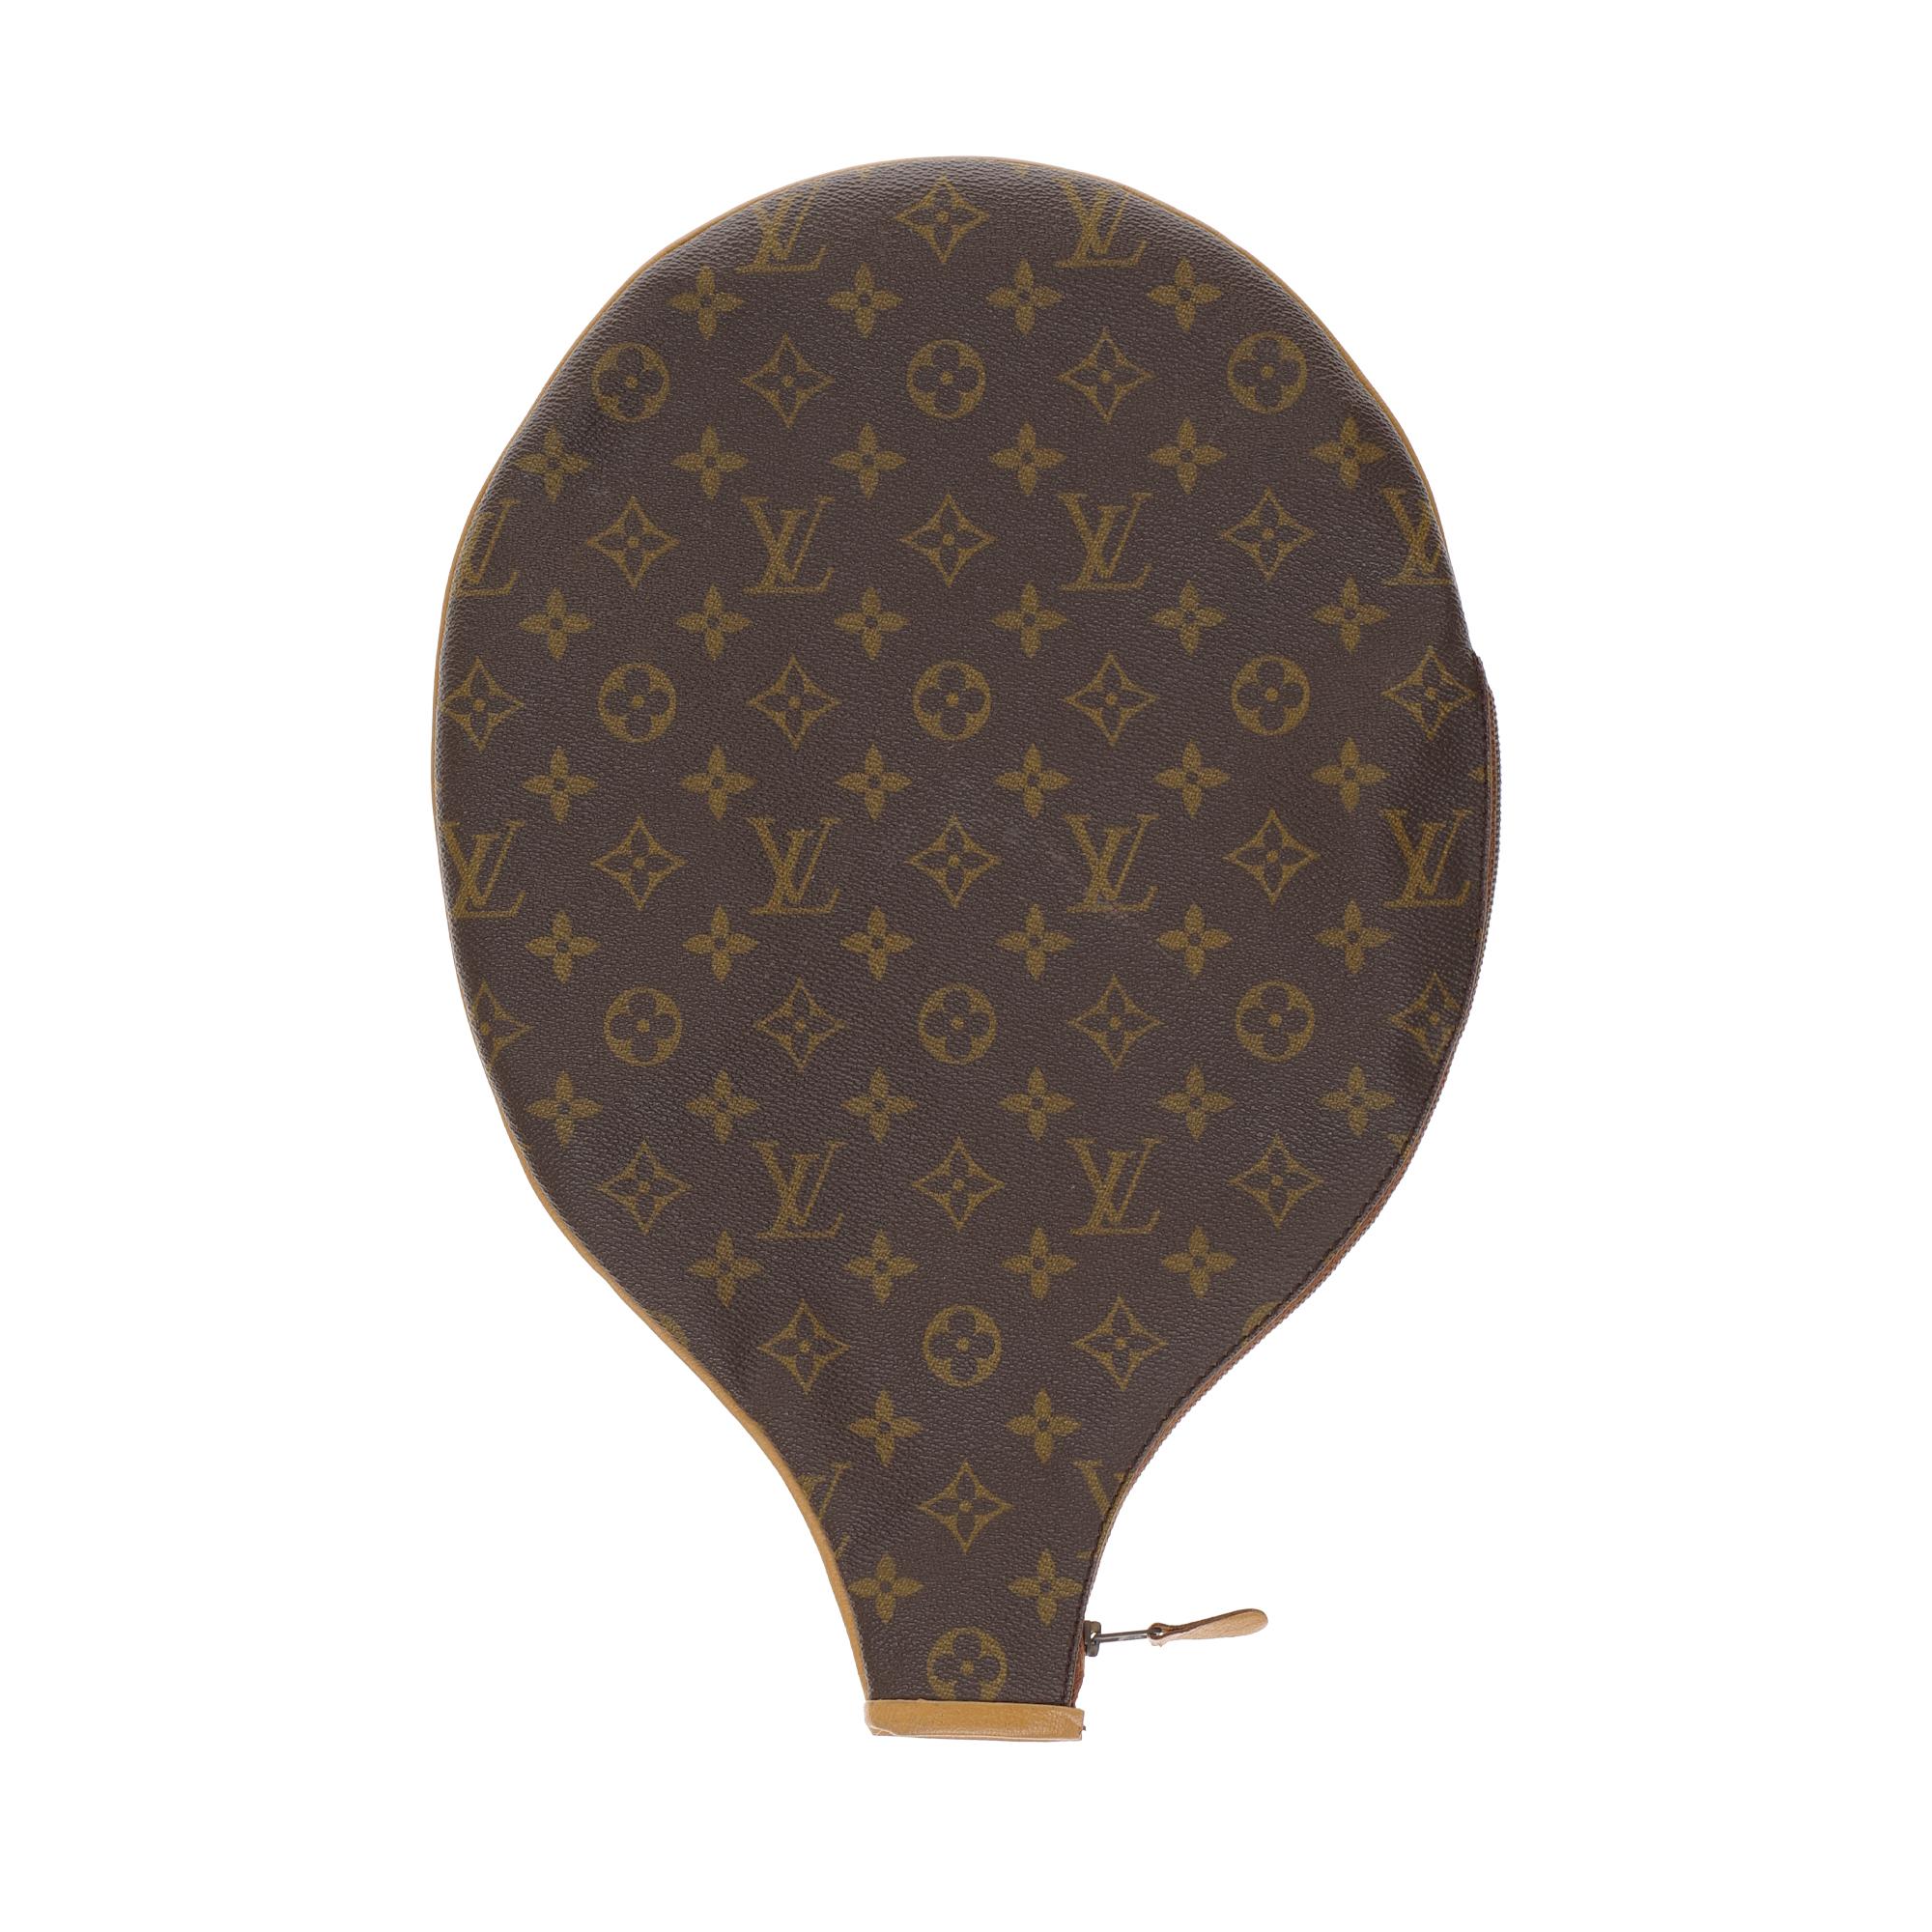 COLLECTOR PIECE

Louis Vuitton racket cover in monogram coated canvas.
Dimensions: 39 * 27 cm.
In good general condition despite signs of wear and small dirt inside the cover.